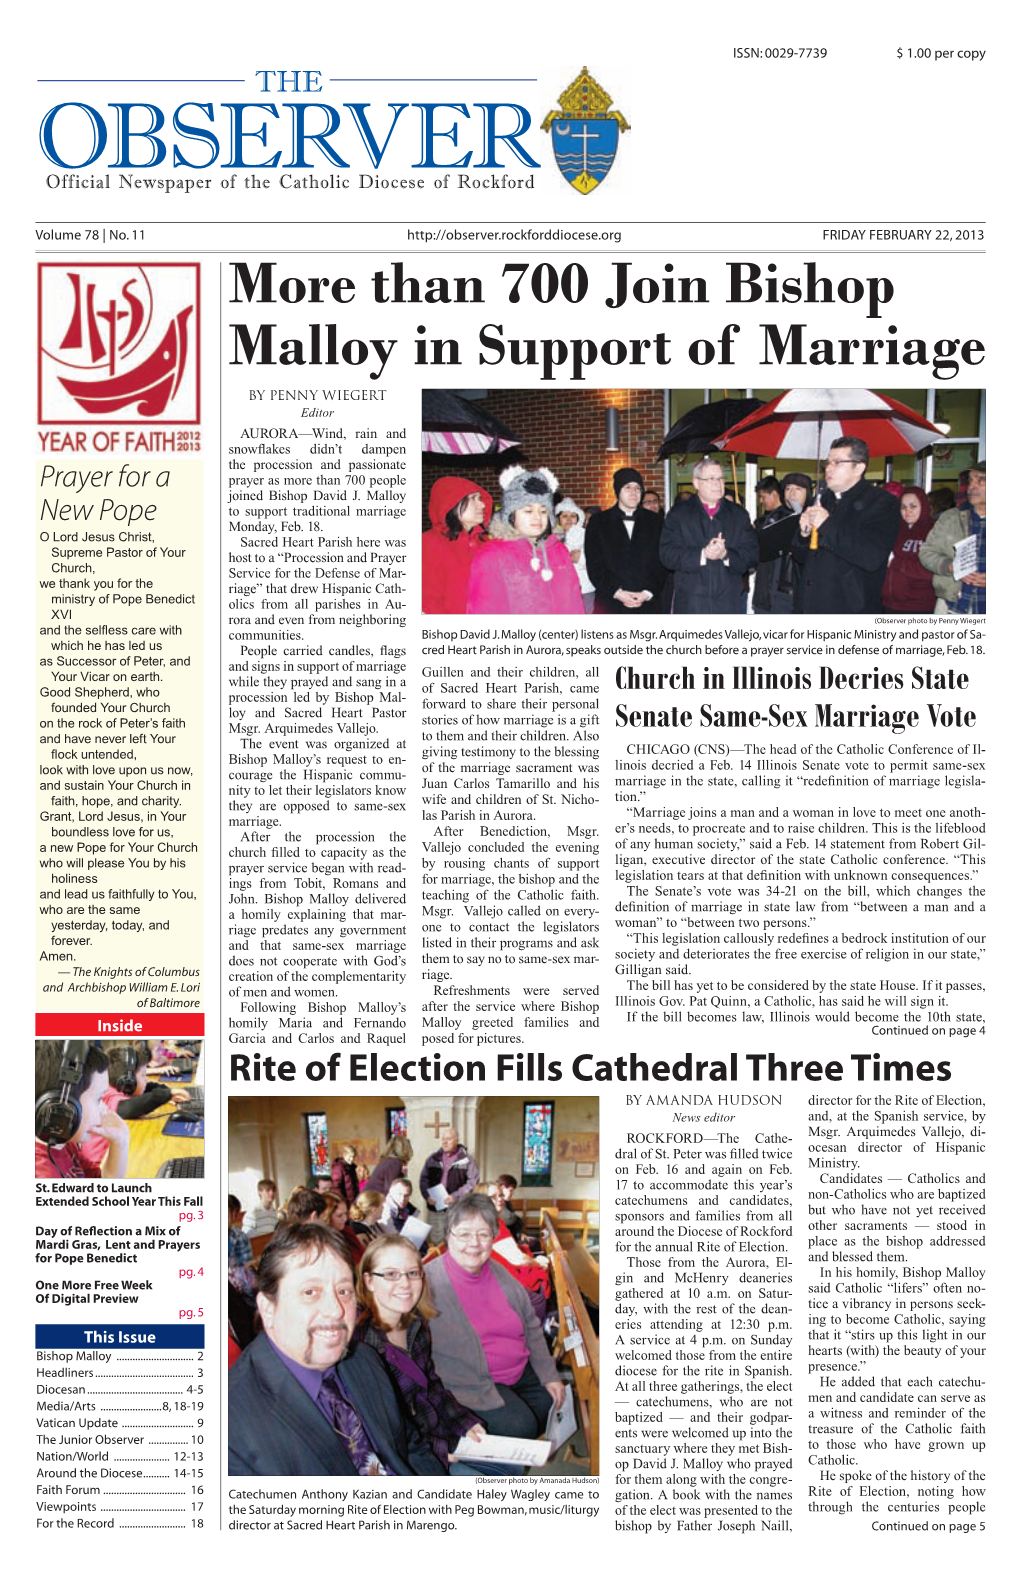 Than 700 Join Bishop Malloy in Support of Marriage